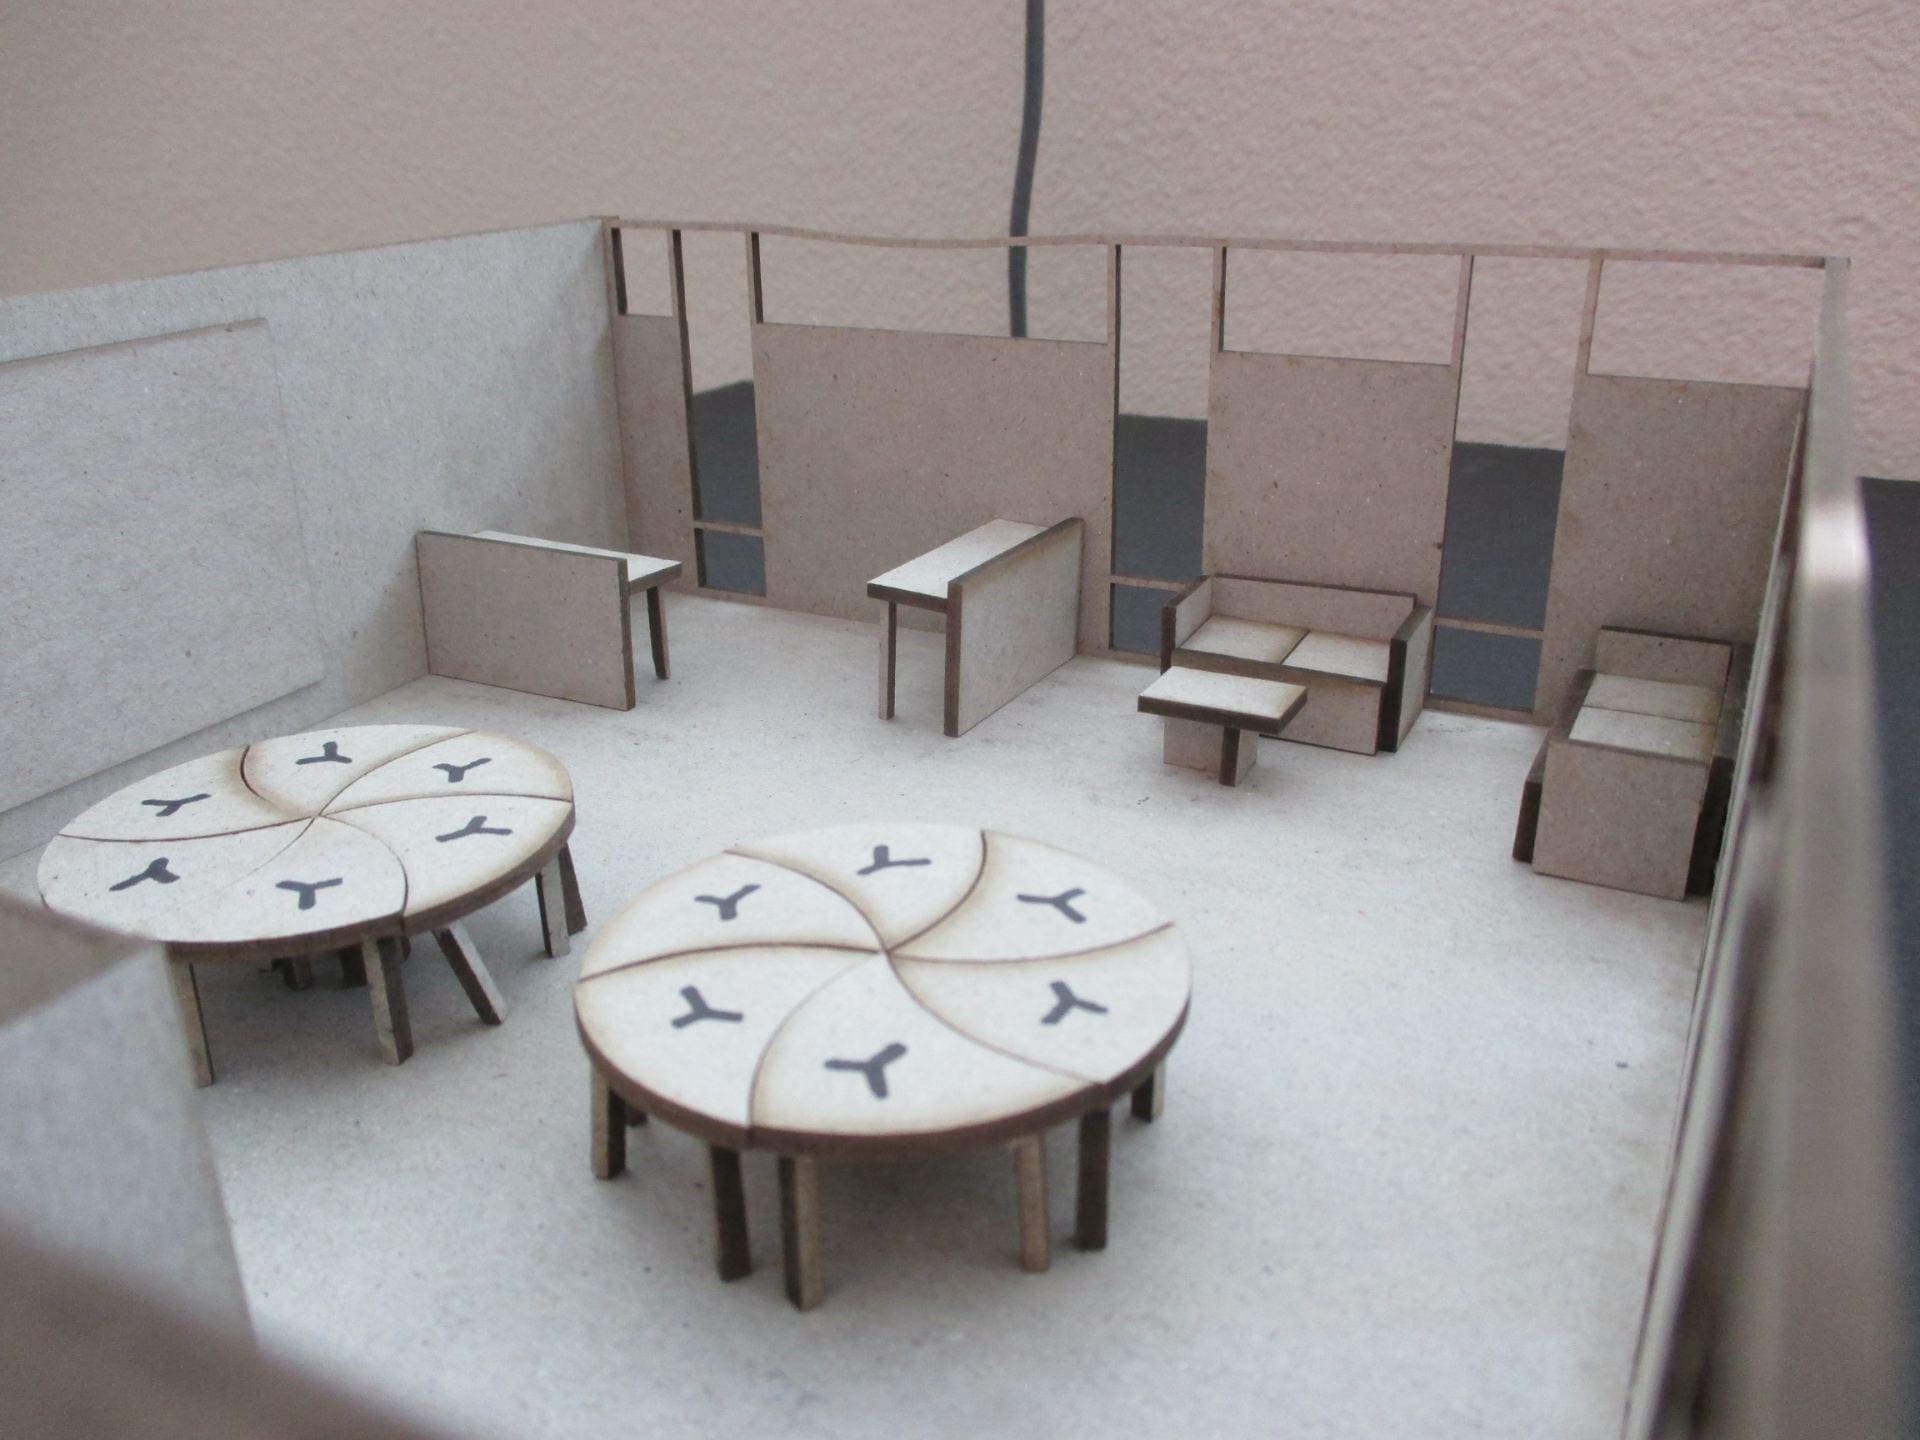 3D model of classroom space made from dense cardboard